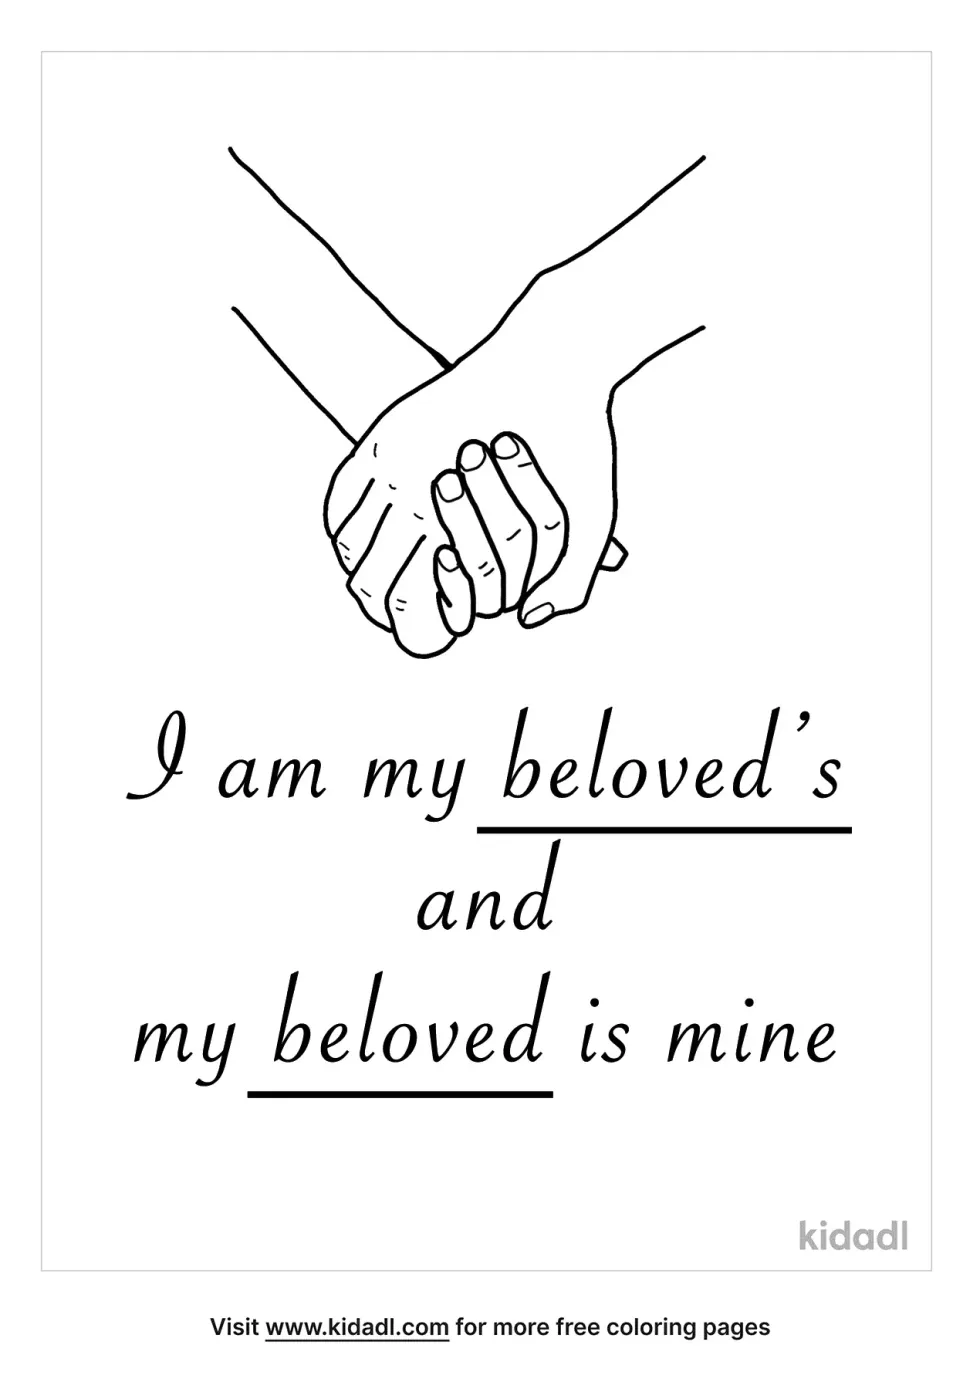 I Am My Beloved's And My Beloved Is Mine Coloring Page